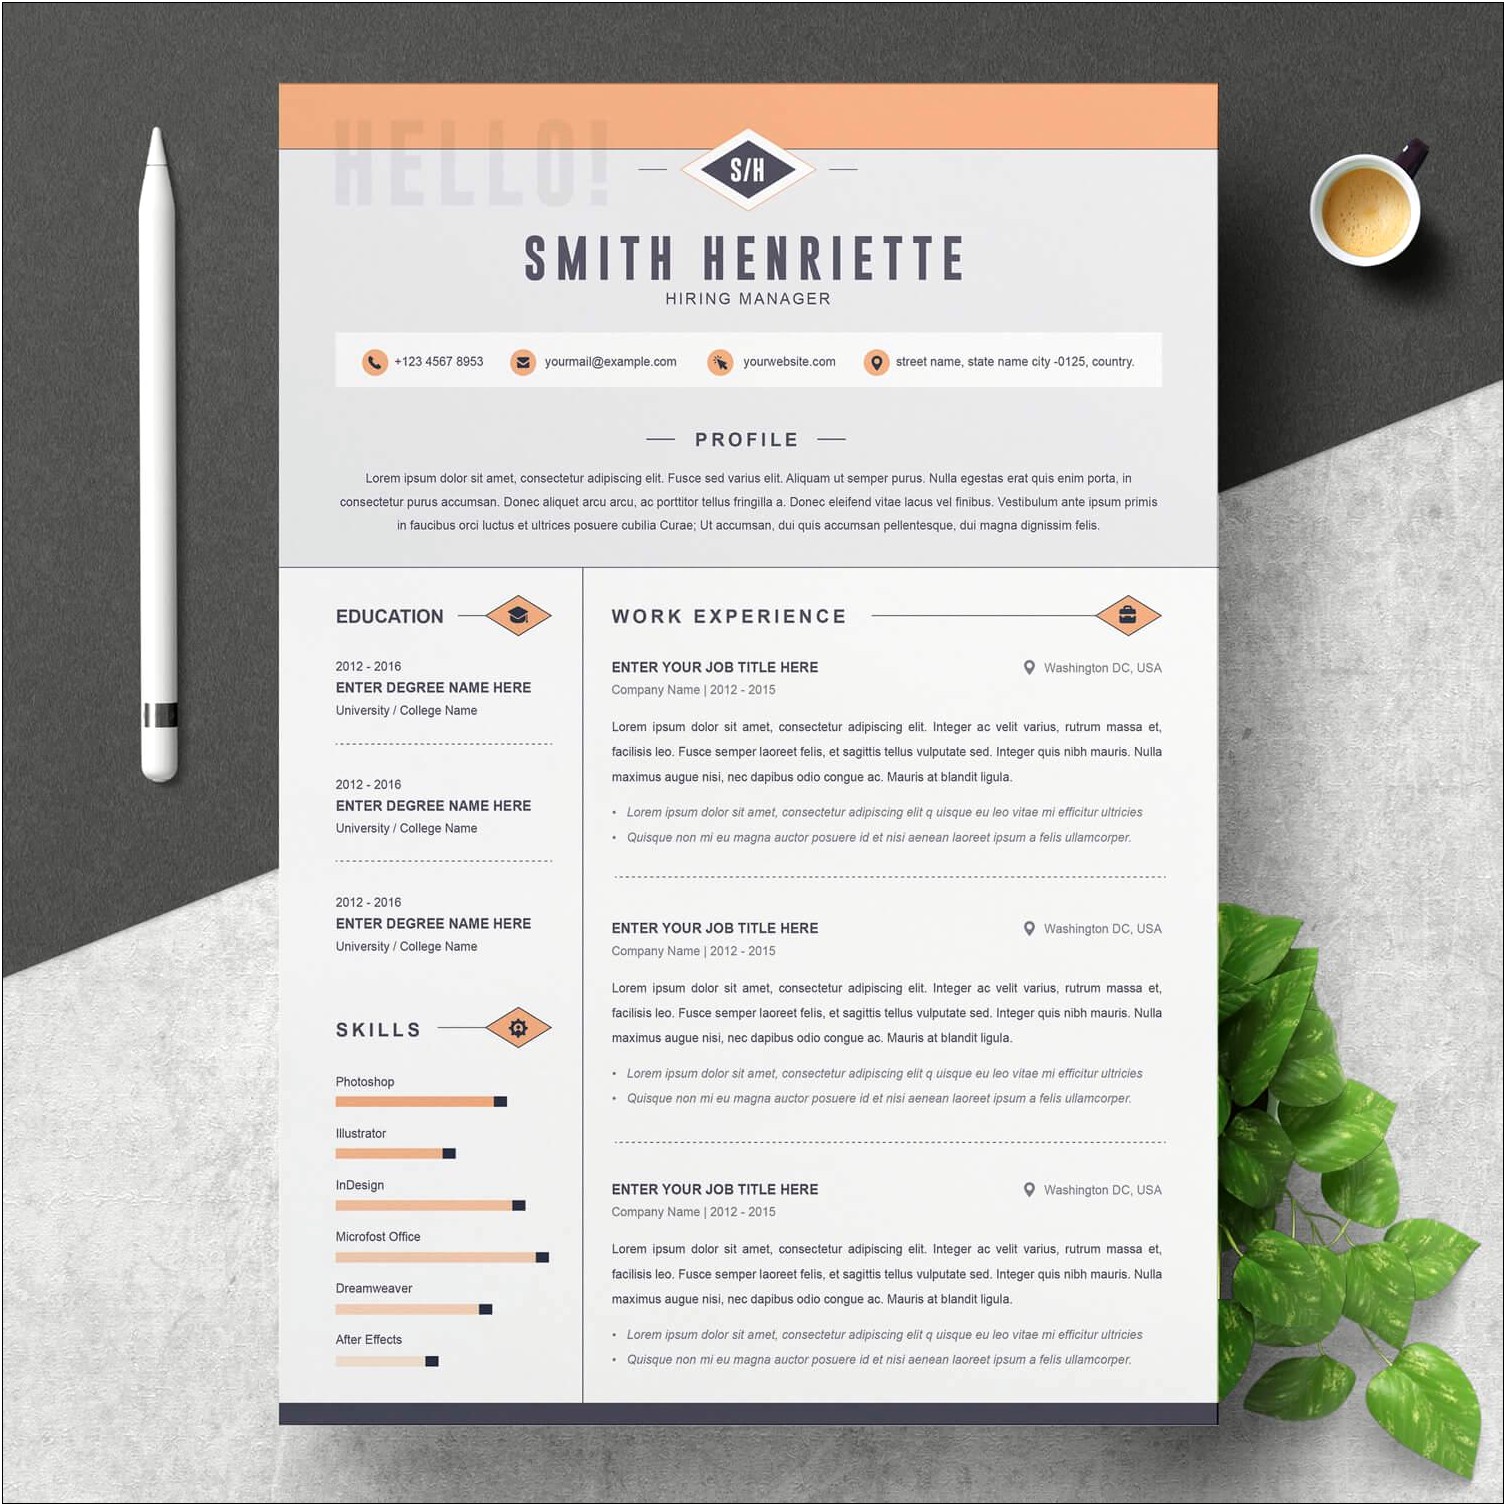 Wp Job Manager Resume Manager Free Download